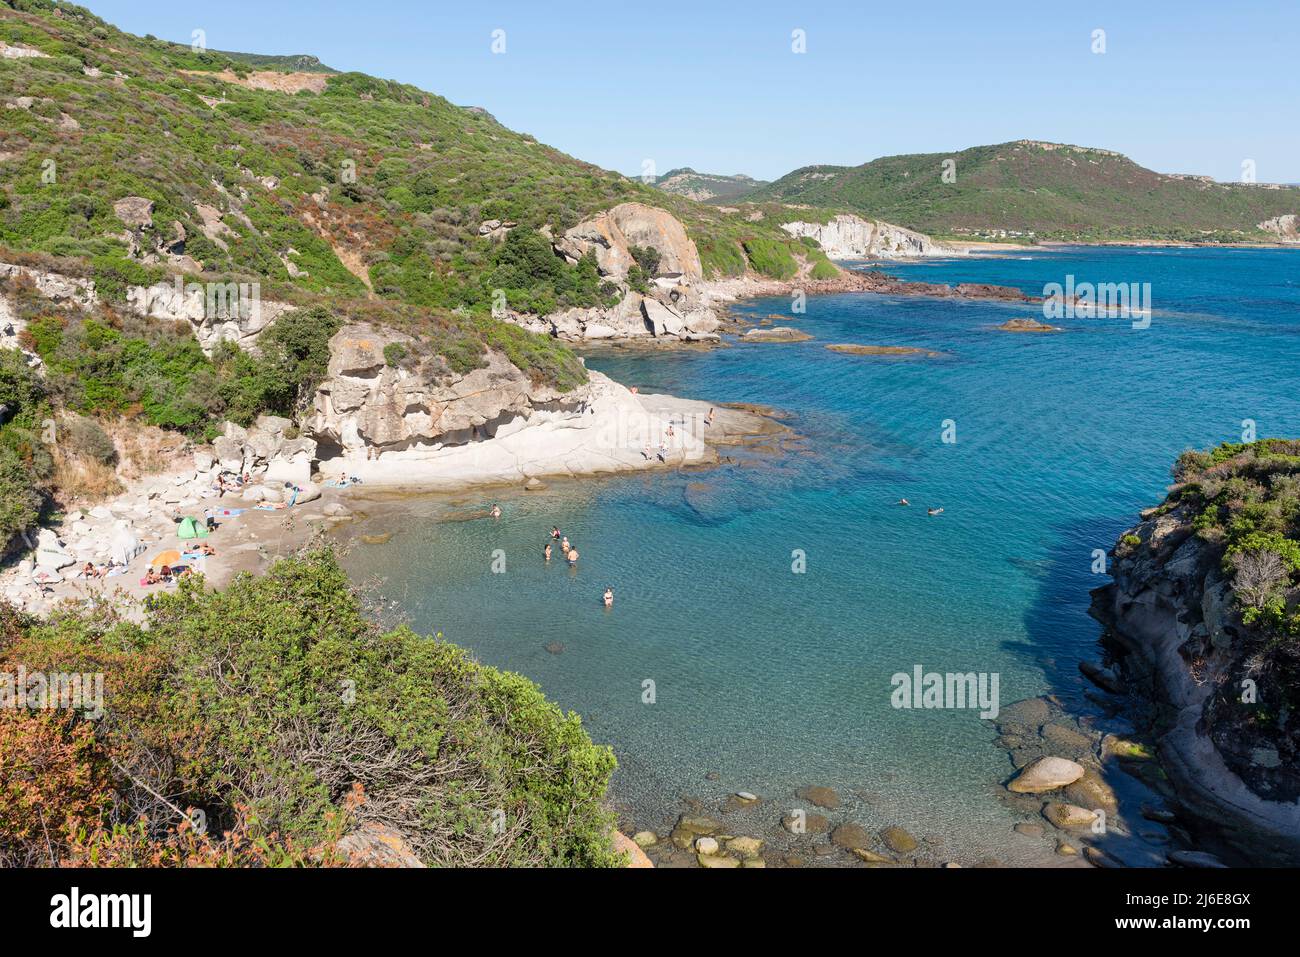 Swimmers at the small sandy beach Spiaggia Cumpoltittu between the rocks of the mountainous west coast of Sardinia north of Bosa Stock Photo